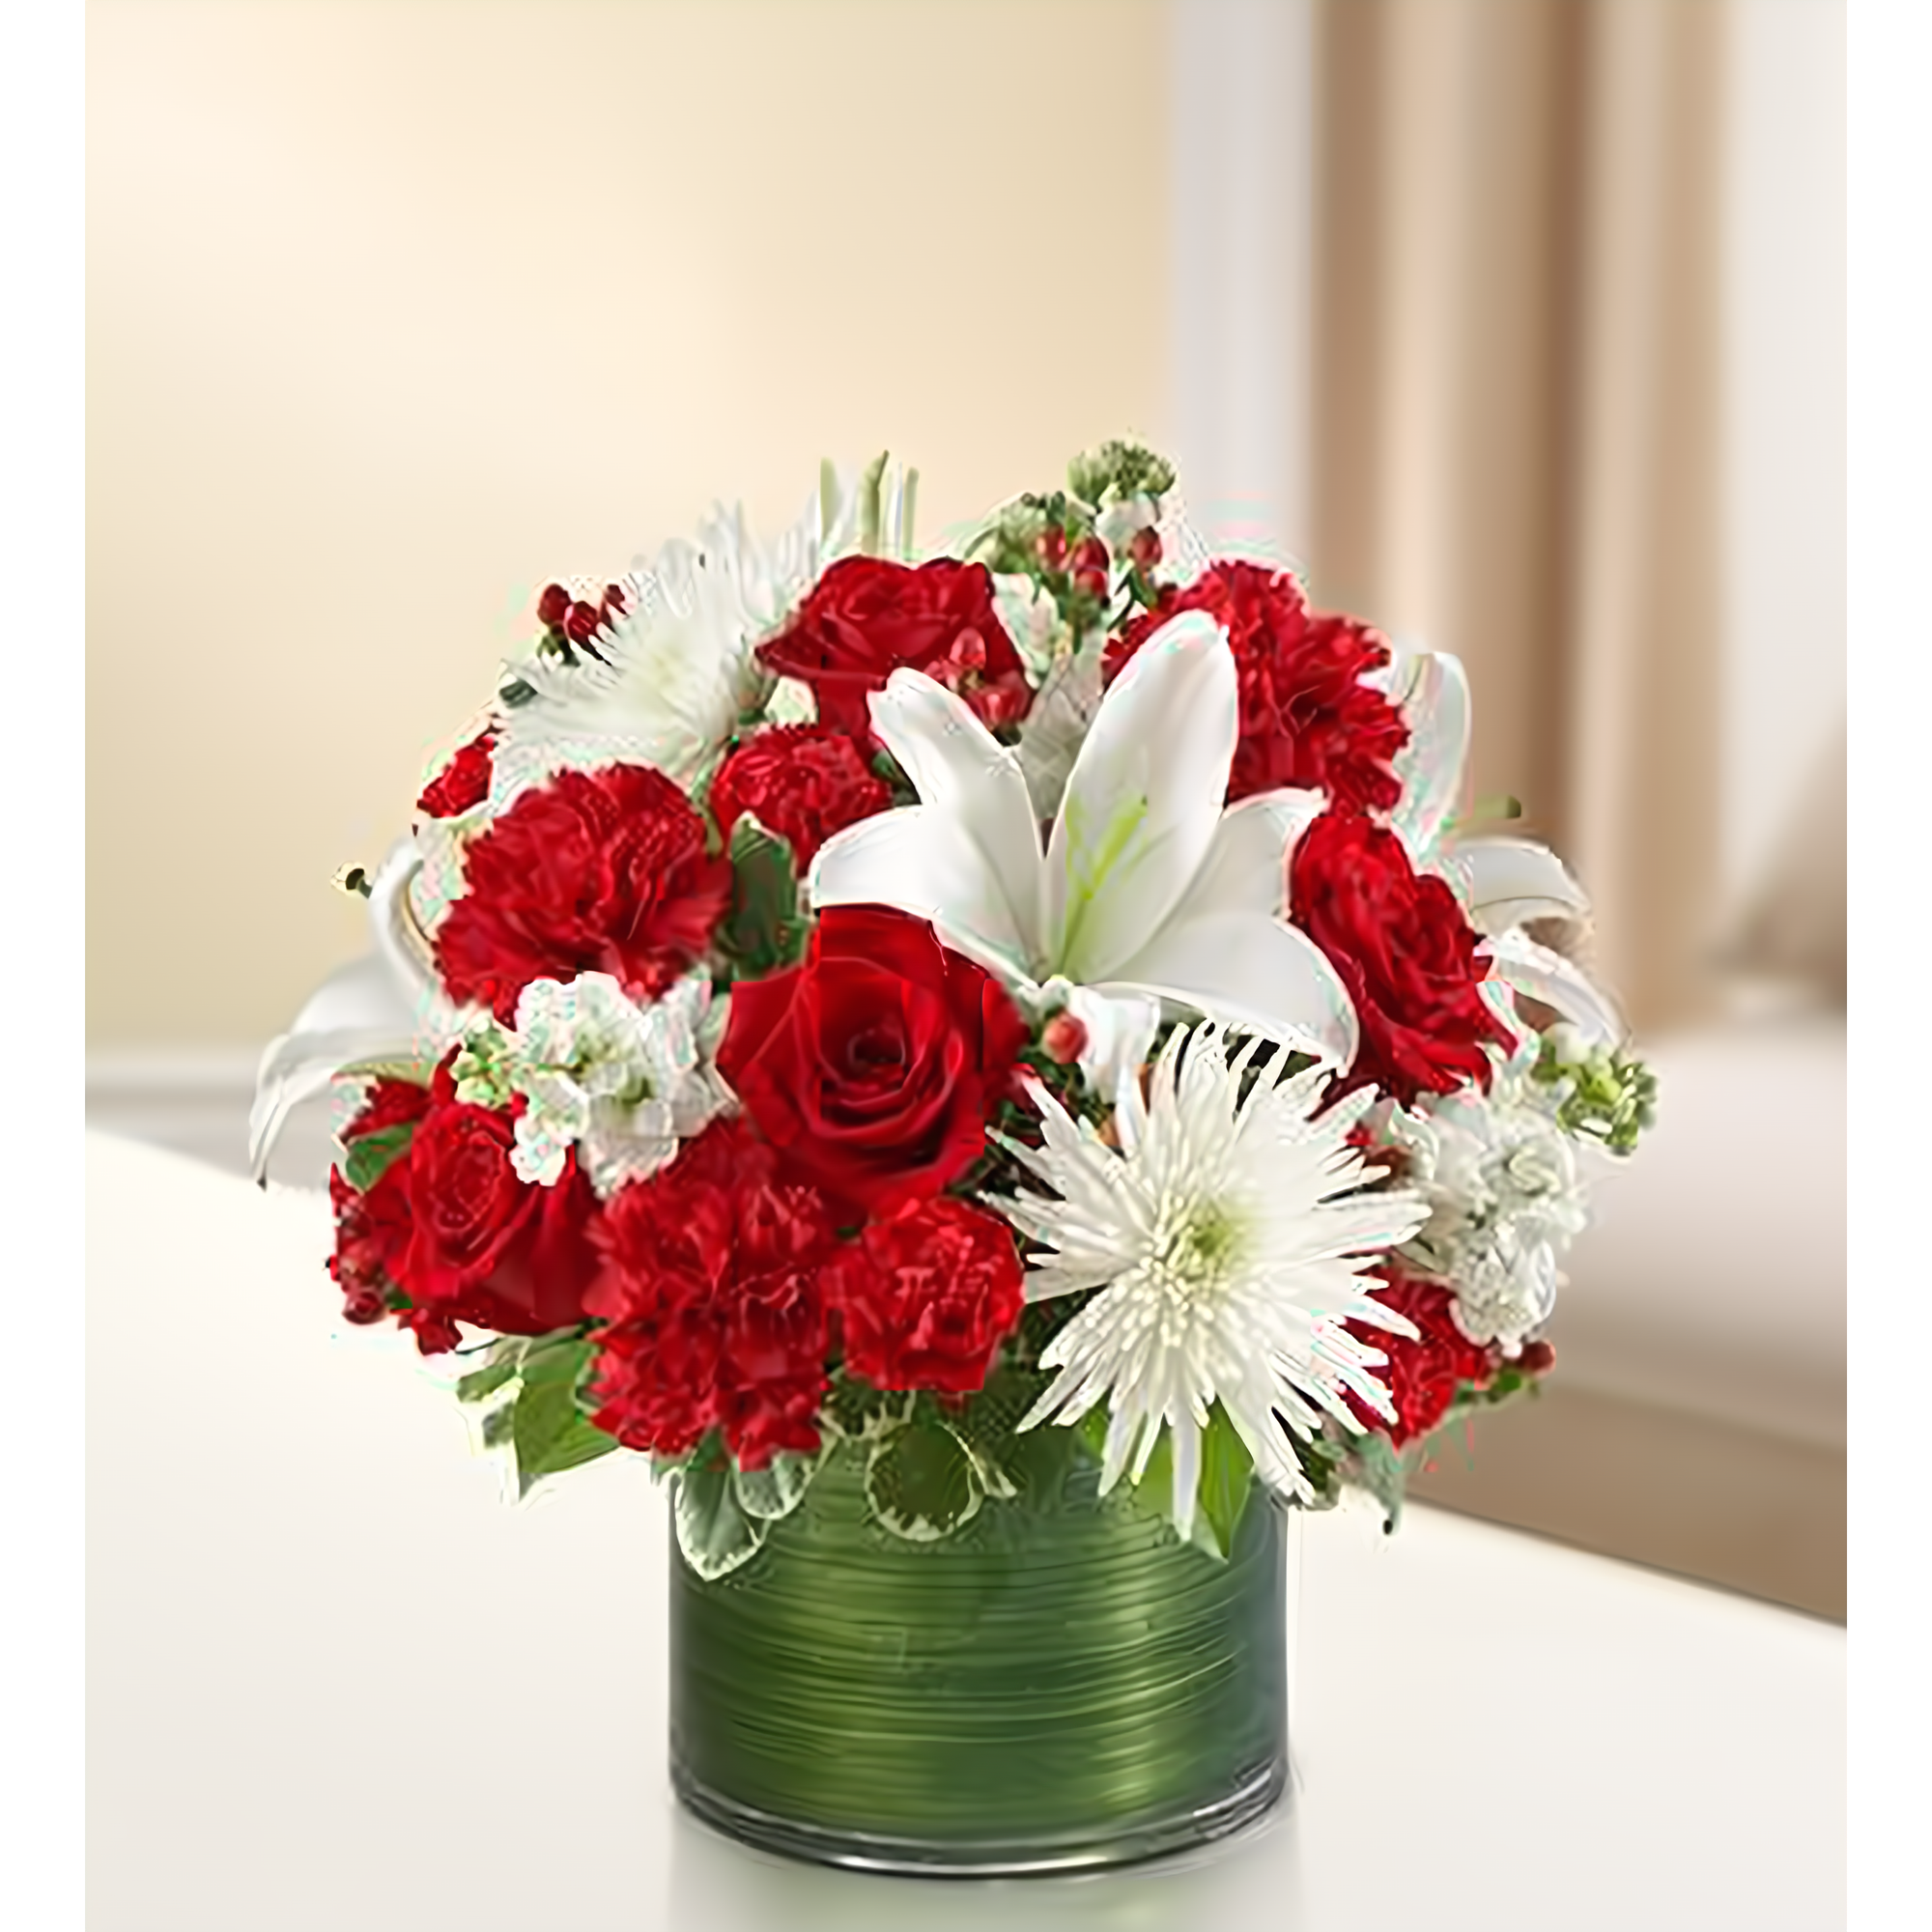 Manhattan Flower Delivery - Cherished Memories - Red and White - Funeral > Vase Arrangements